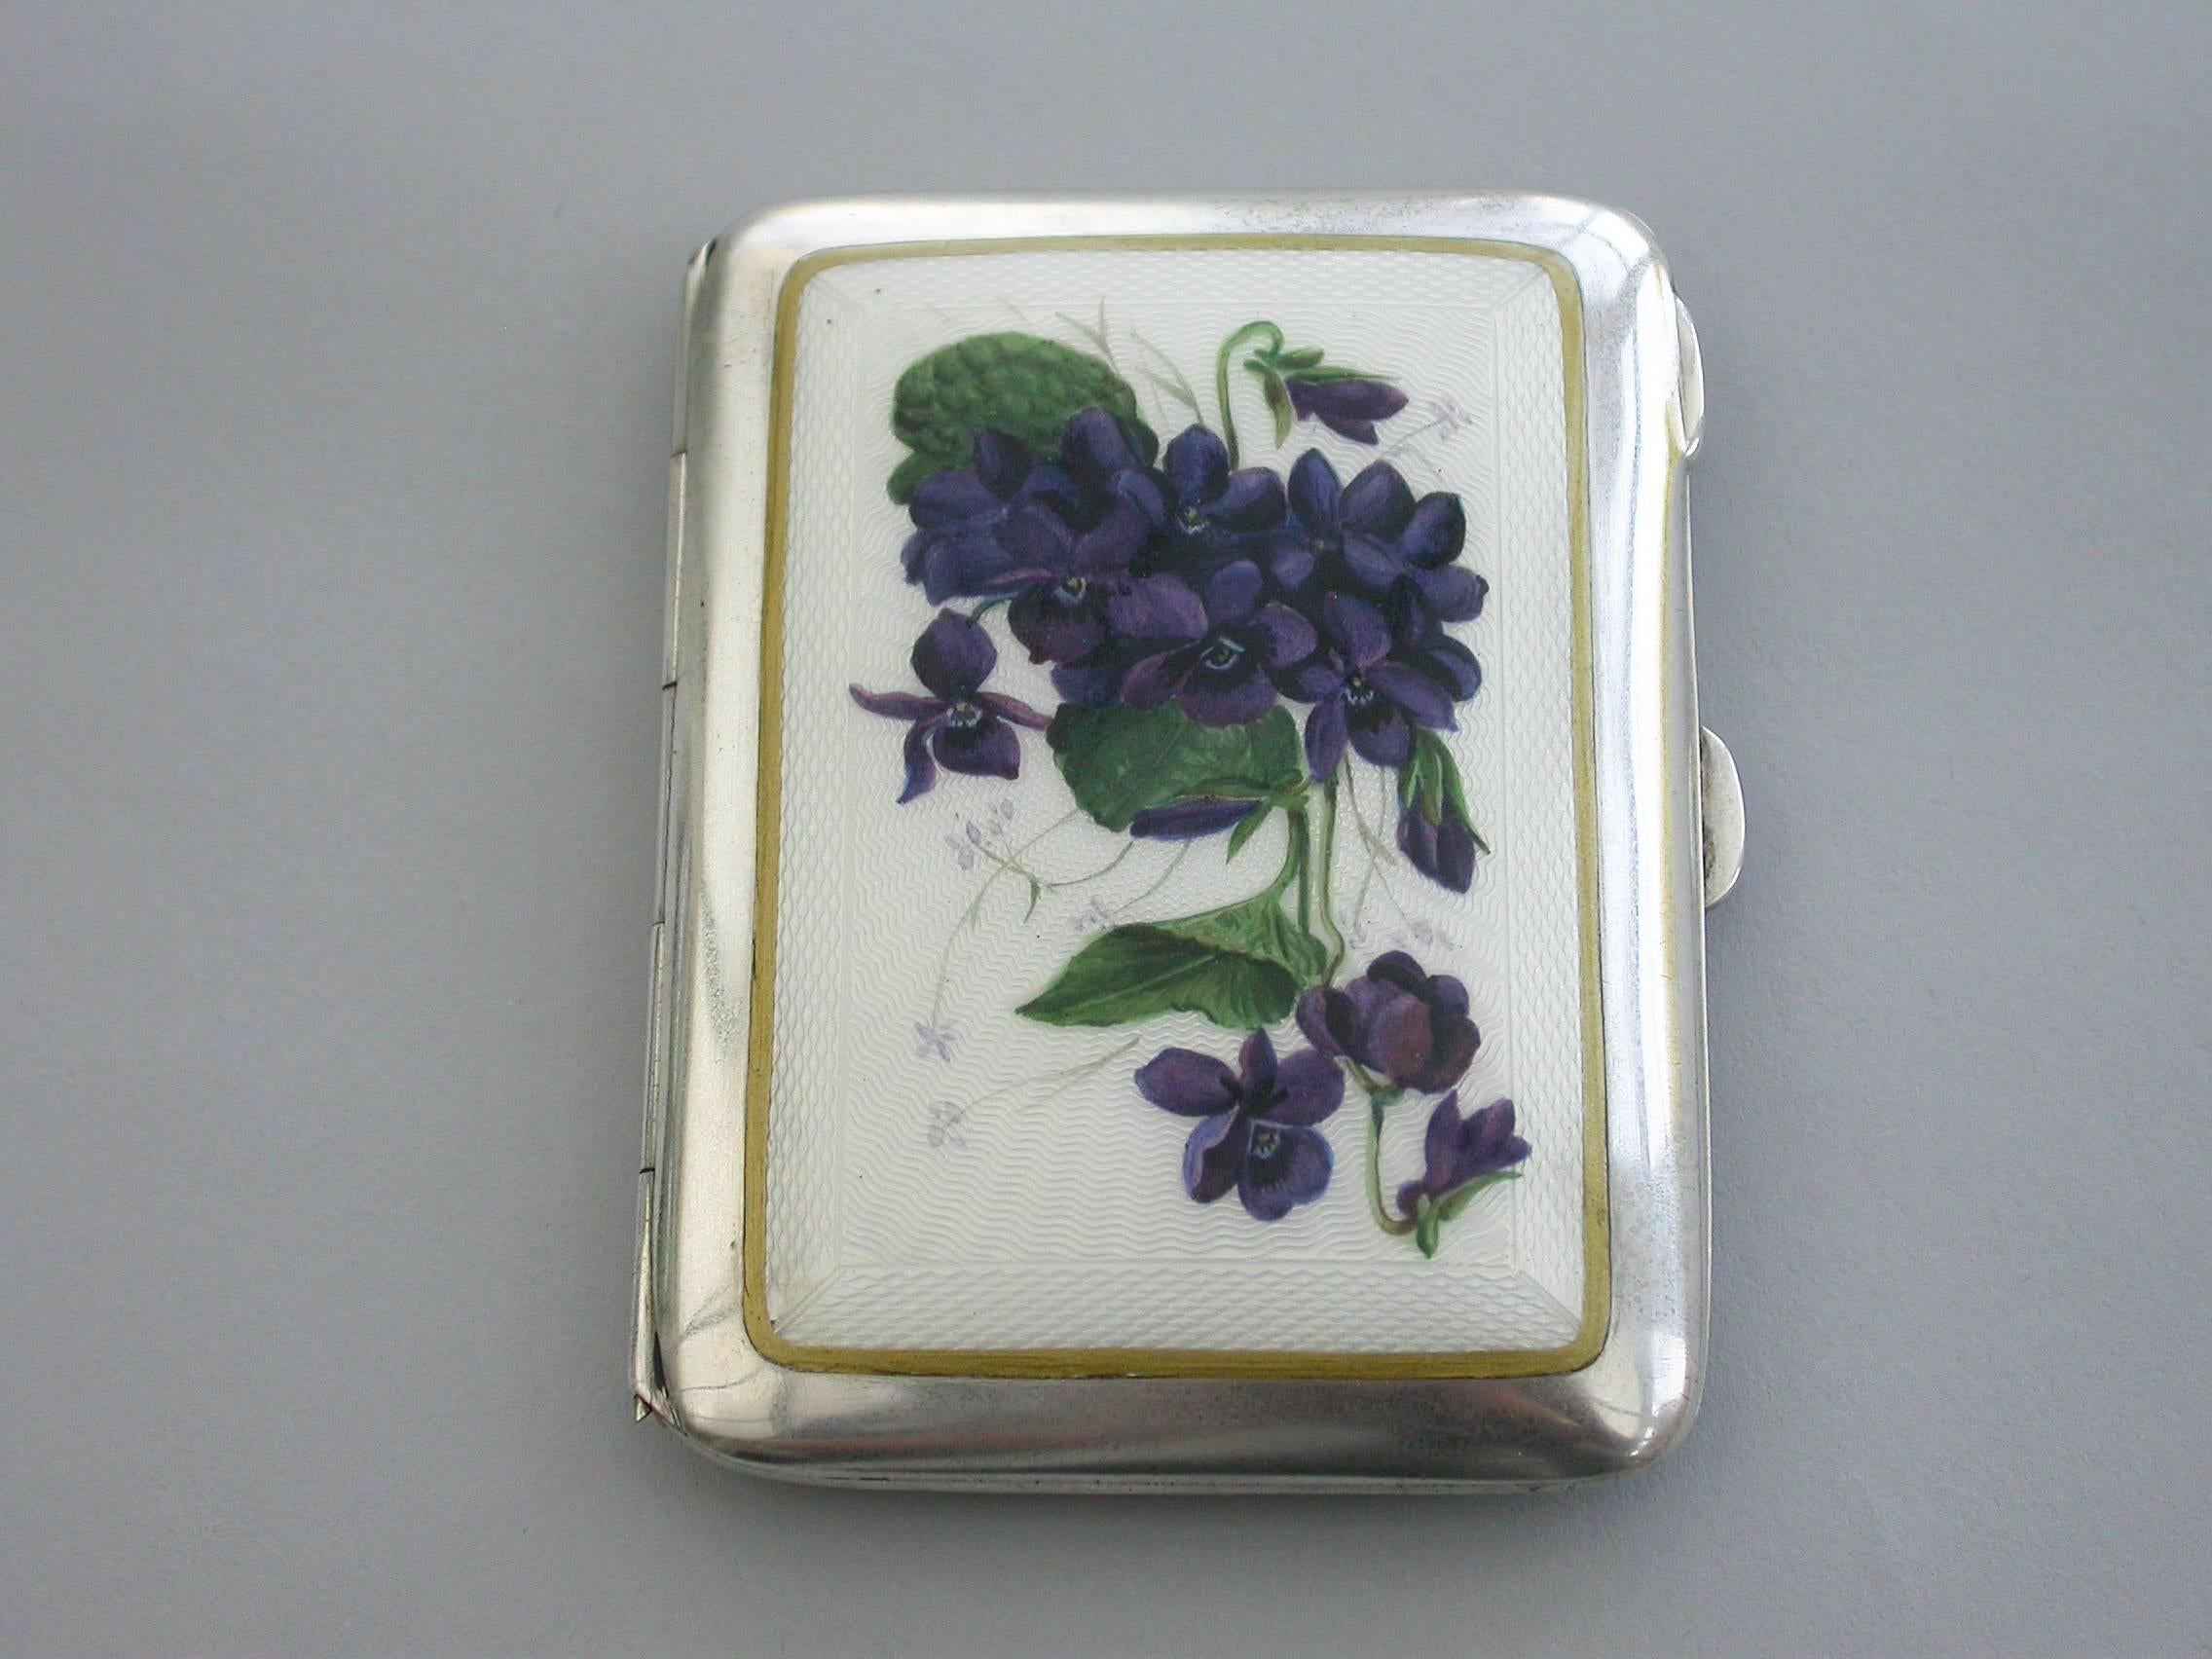 An early 20th silver cigarette case of curved rectangular form, the lid with inset guilloche enamel panel painted with sprays and violets. Silver gilt interior.

By Charles S Green & Co, Birmingham, 1915

In good condition with no damage or